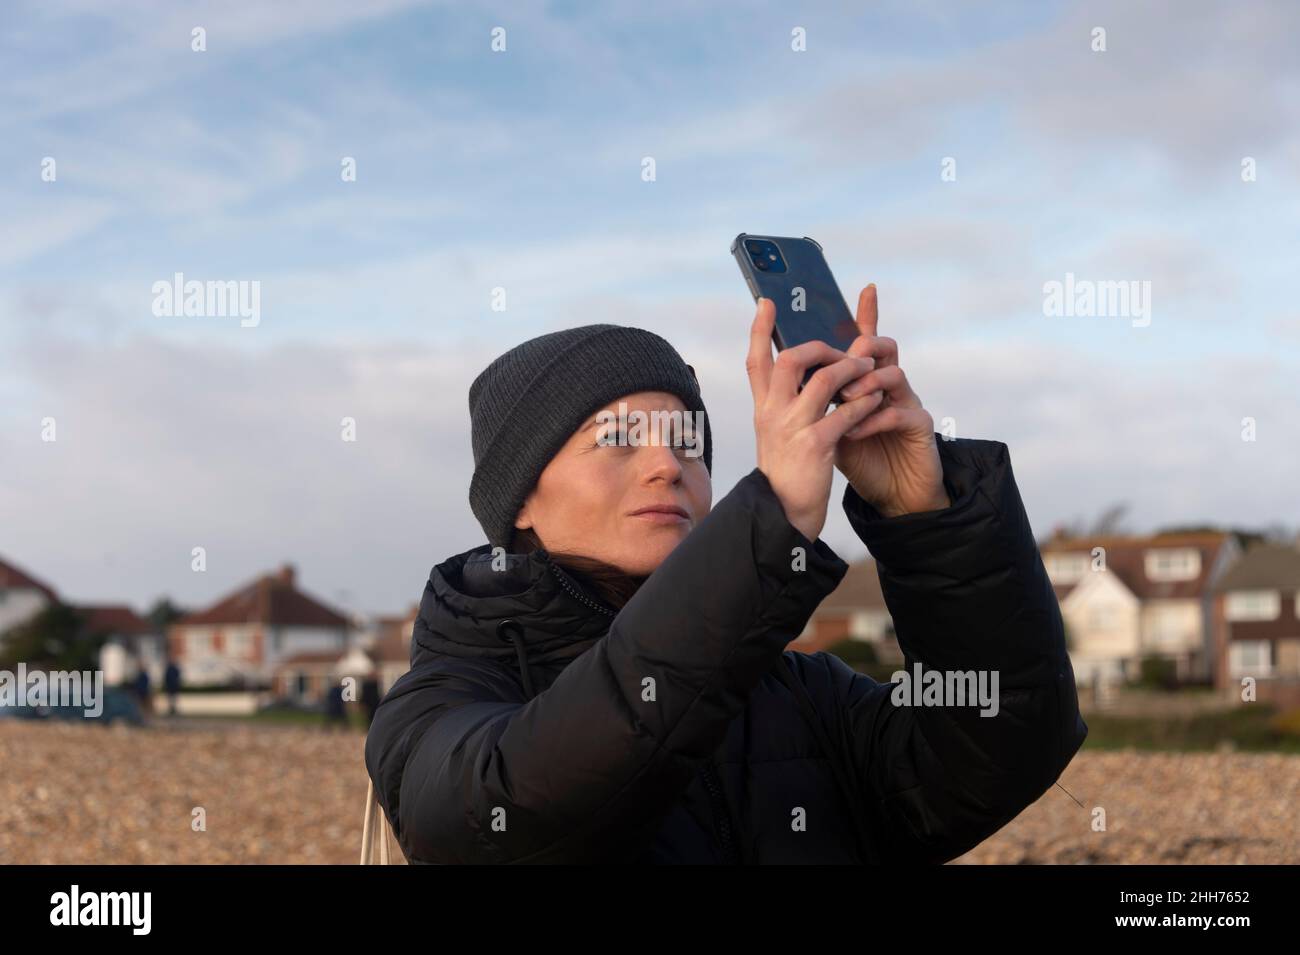 Woman wearing a wooly hat taking a selfie on a mobile phone, outdoors winter. Stock Photo